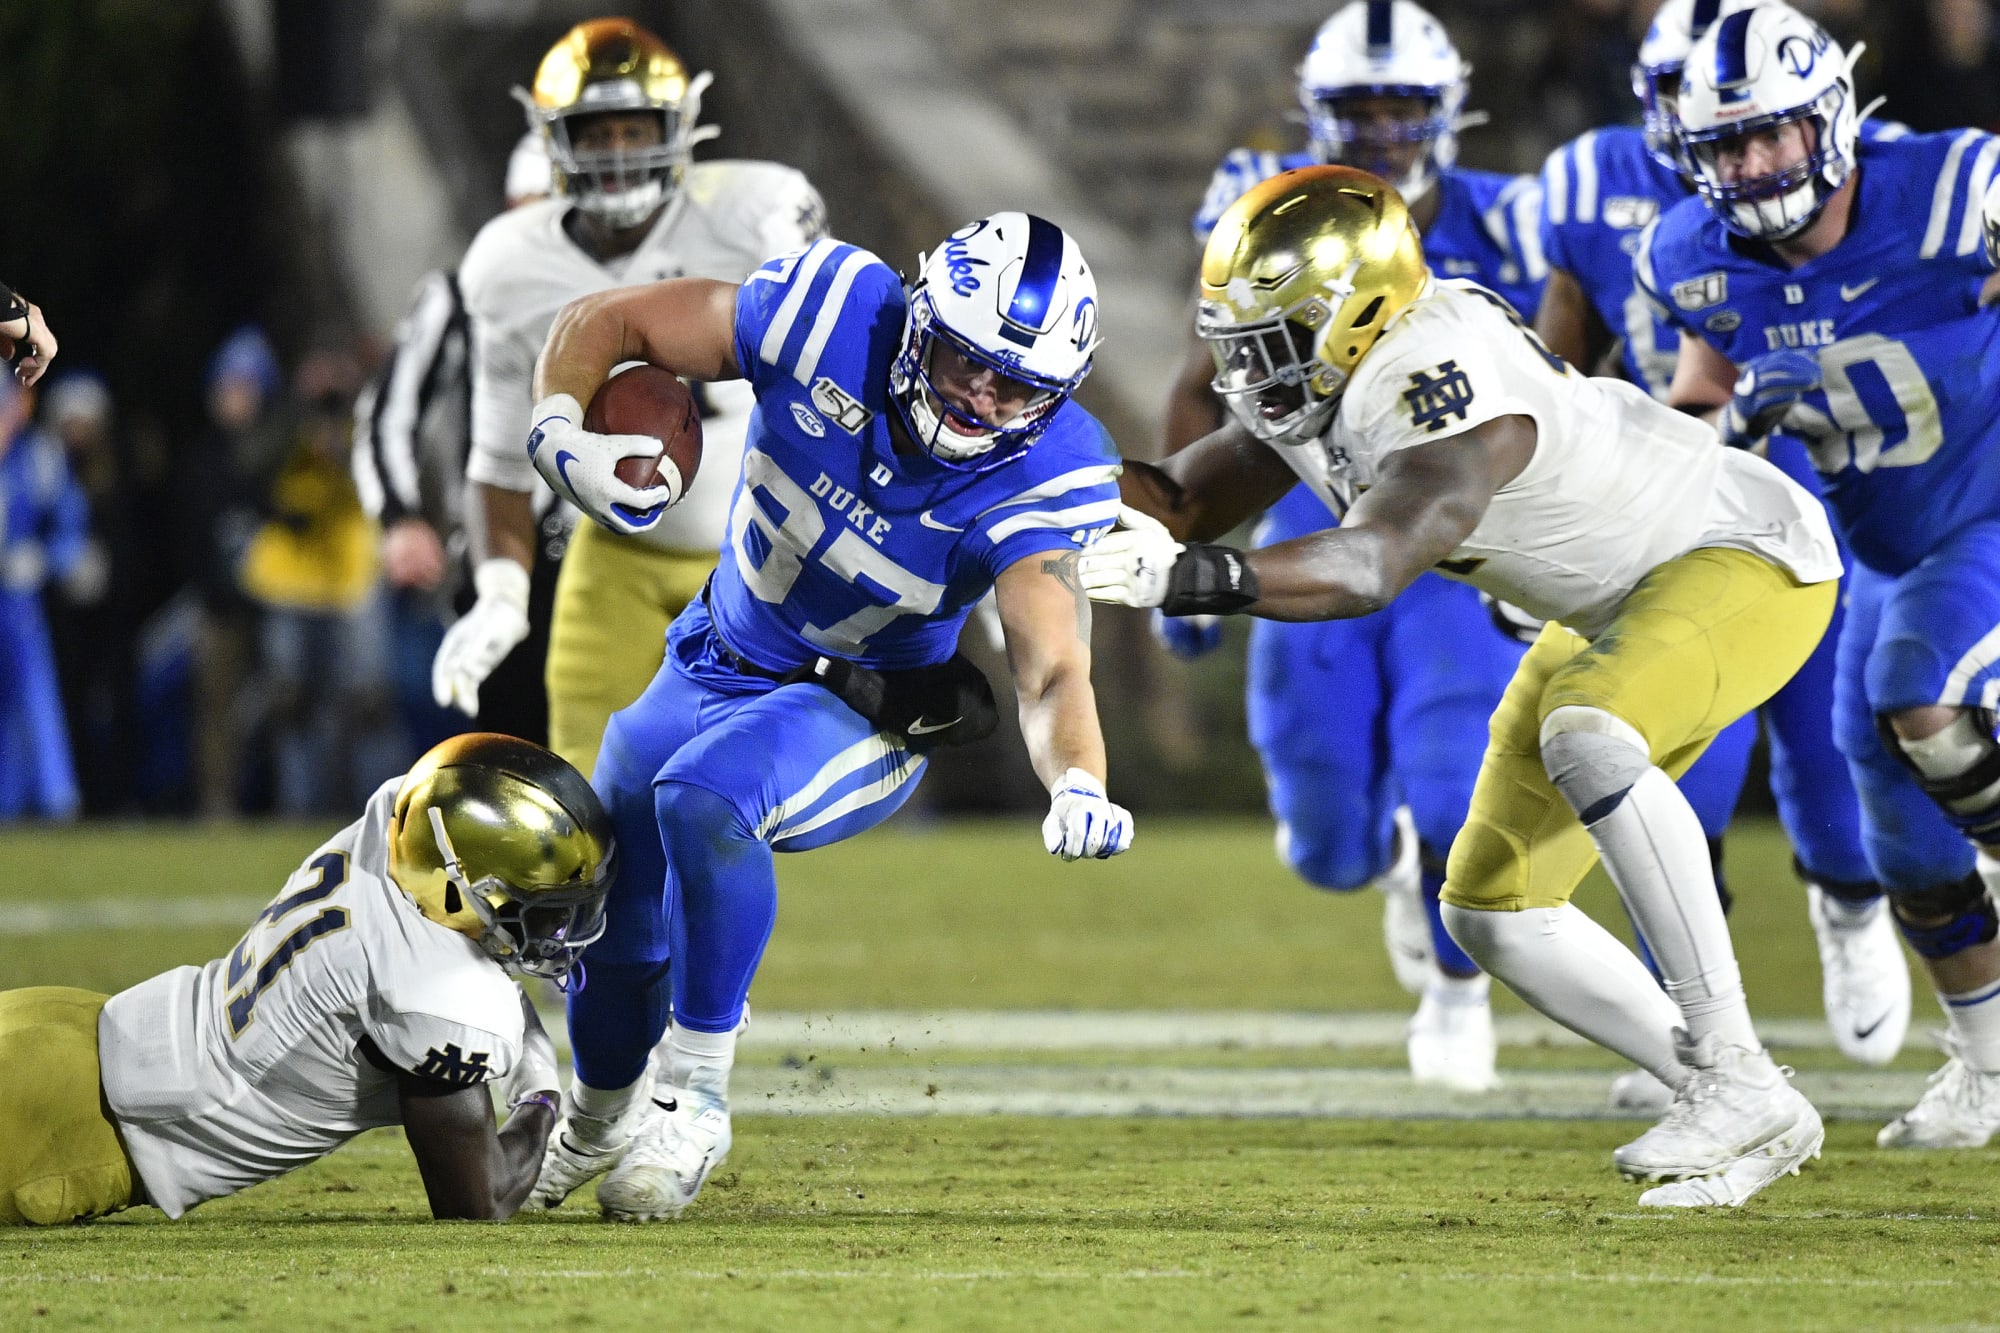 ACC revises Duke football schedule because of COVID-19 pandemic